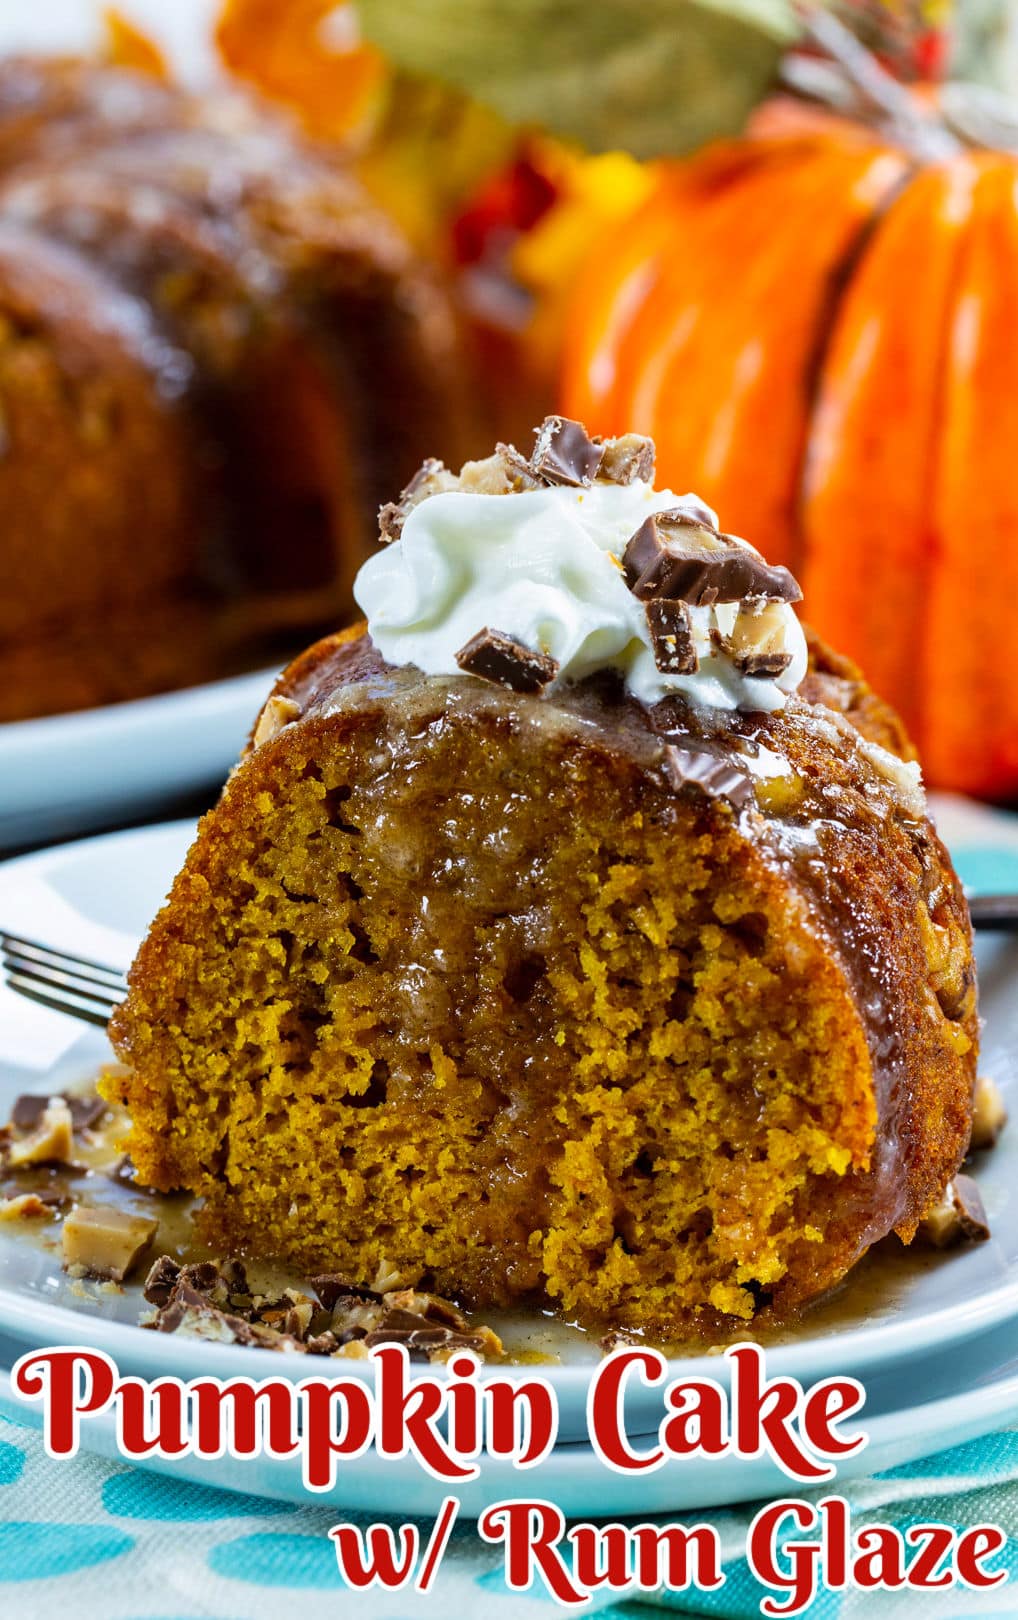 Slice of Pumpkin Cake with Rum Glaze on a plate.